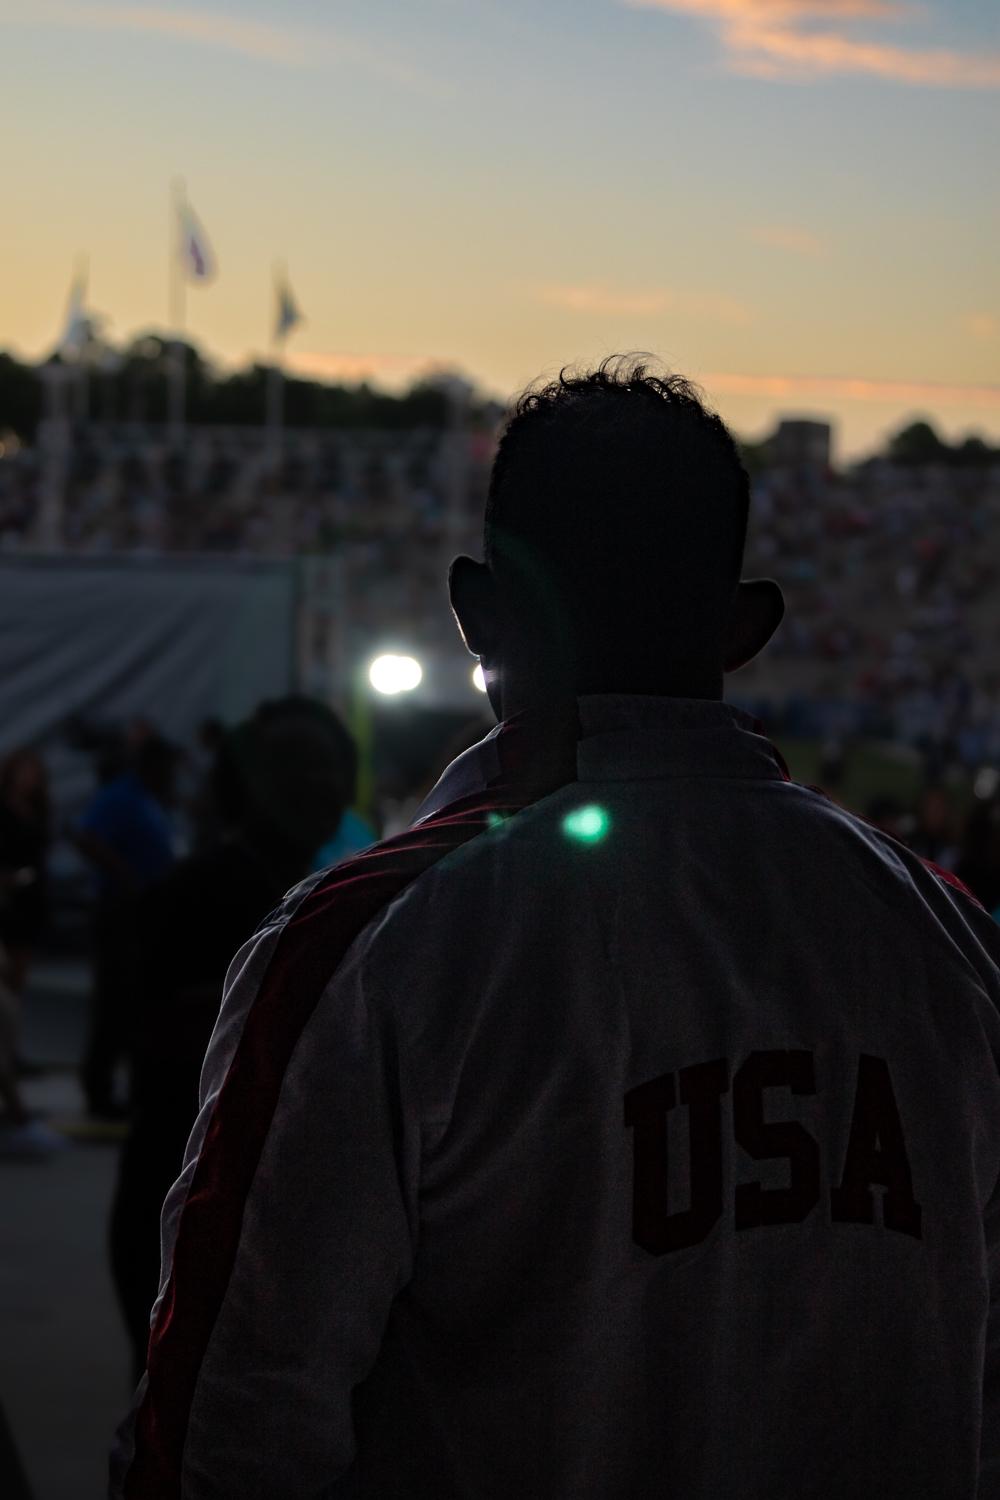 Alabama Soldier finishes World Games competition, inspires fans